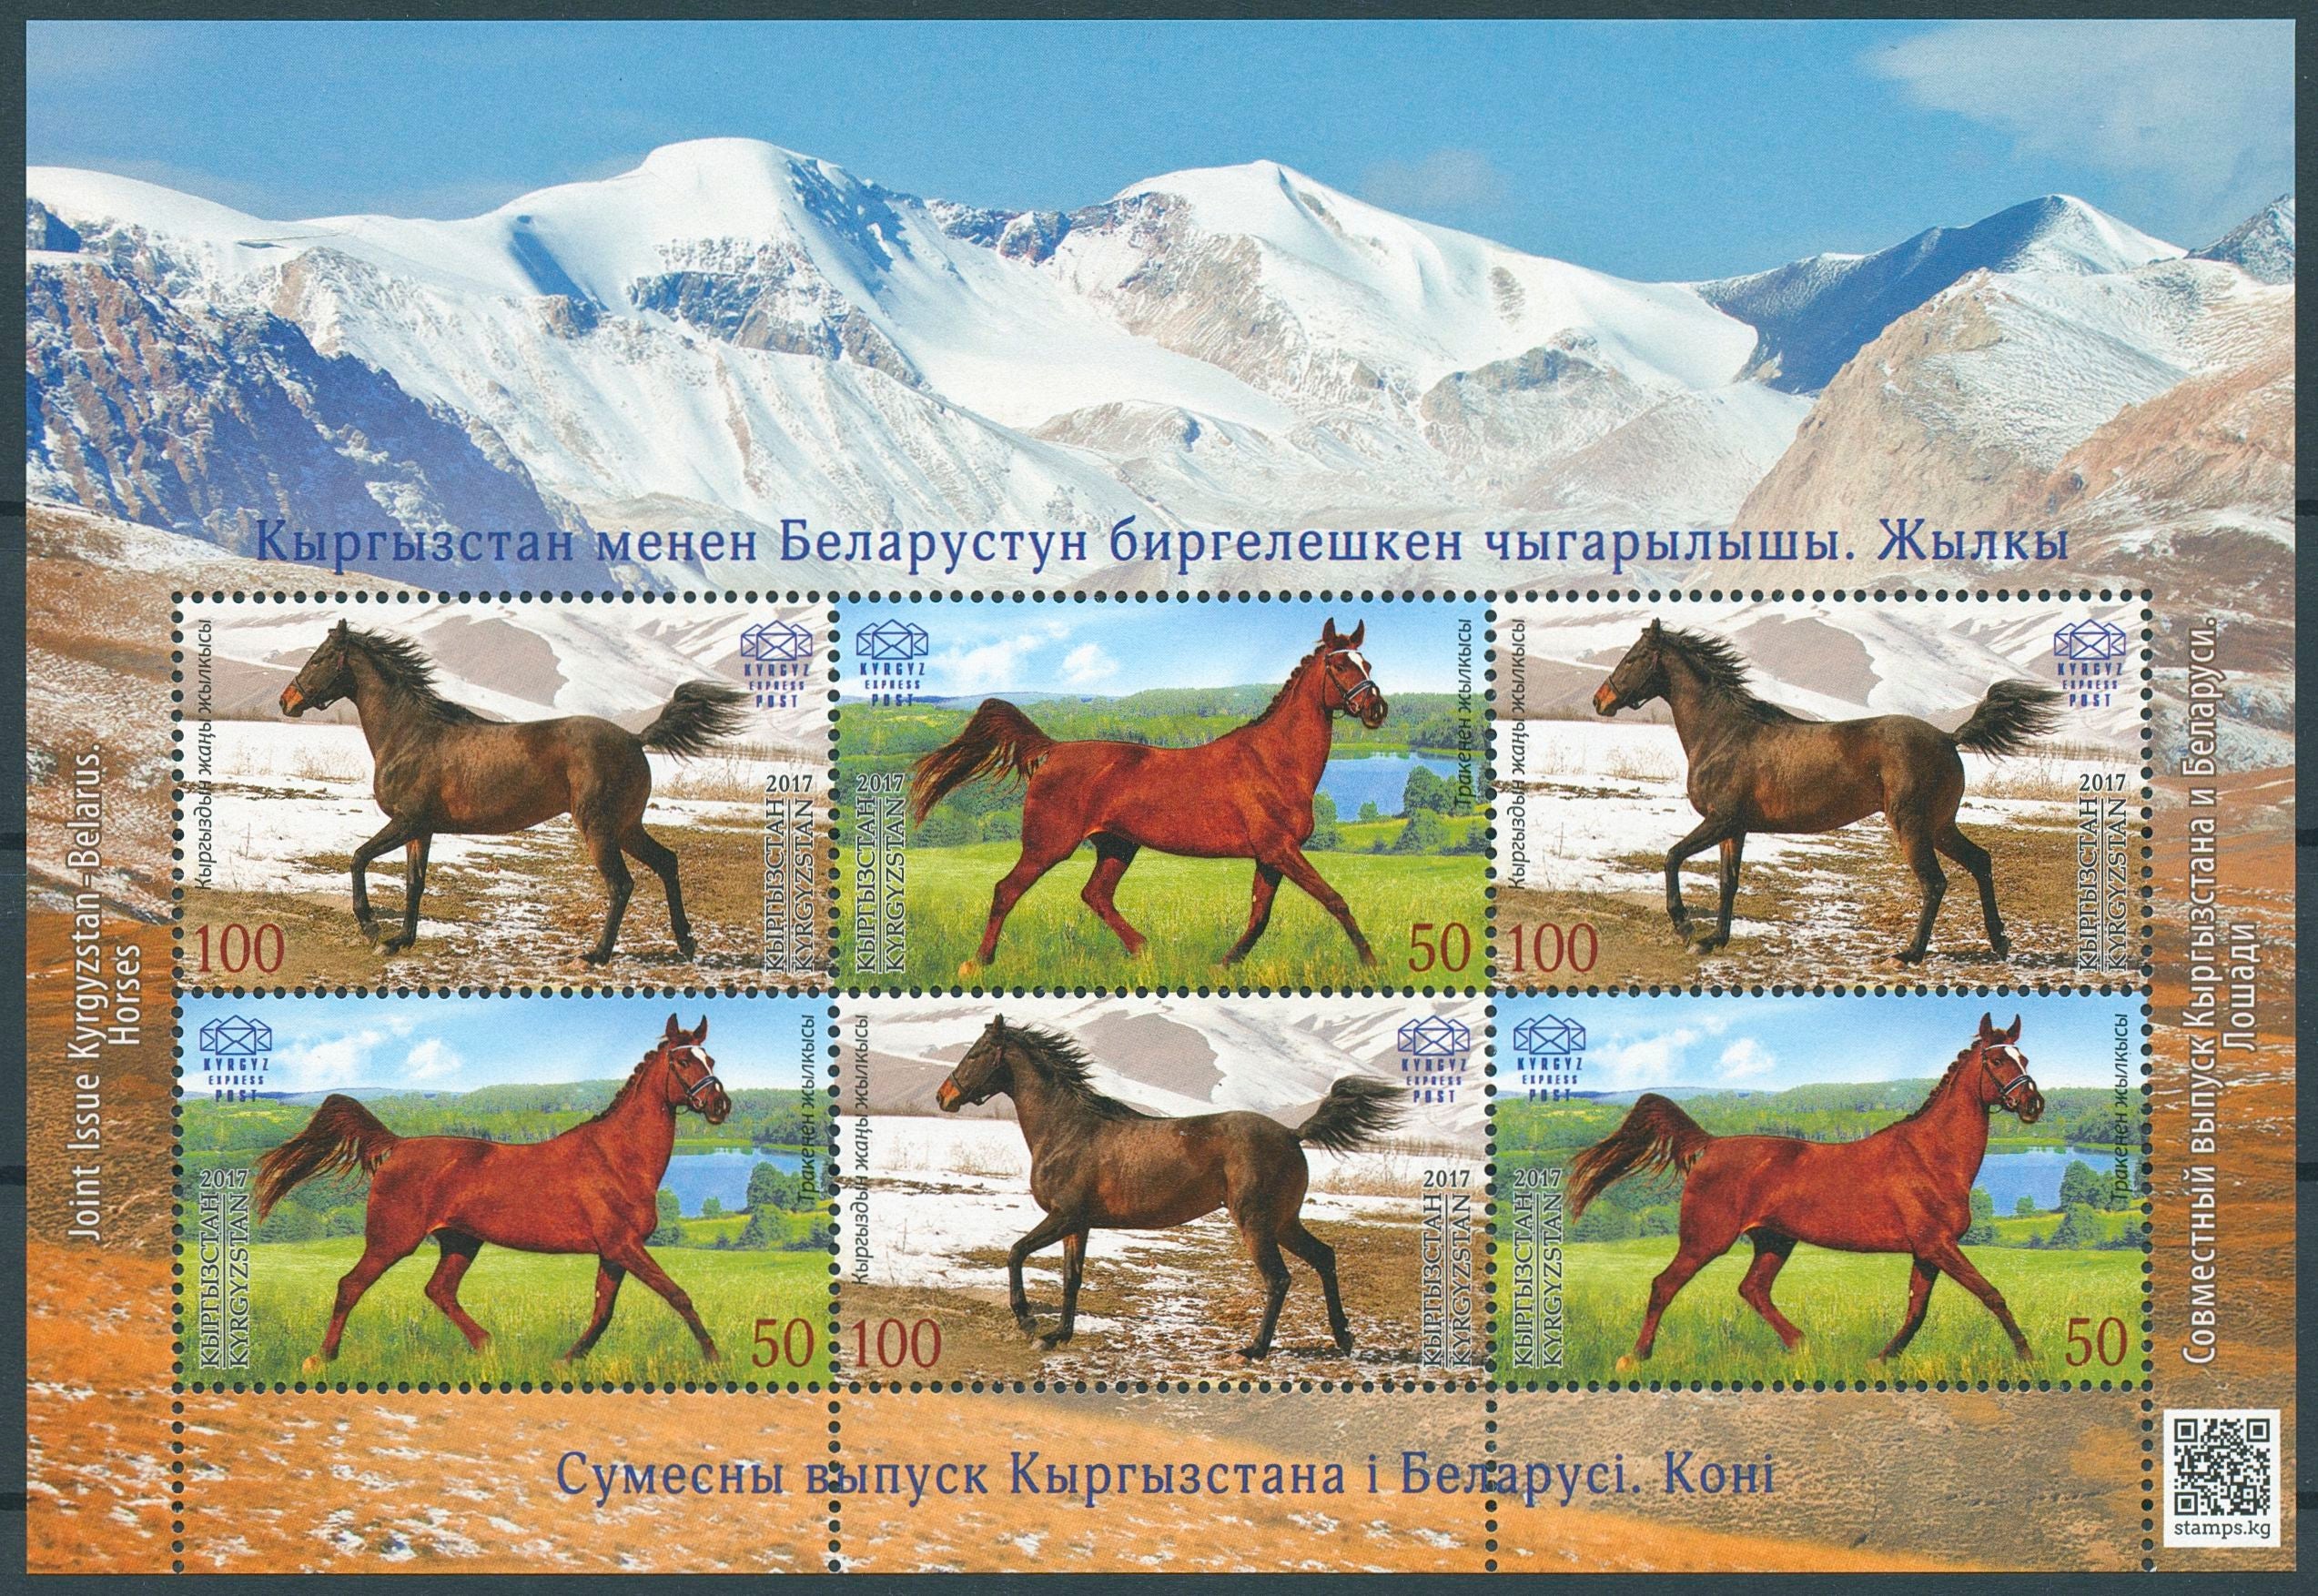 Kyrgyzstan KEP 2017 MNH Horses Joint Issue JIS Belarus 6v M/S Animals Stamps